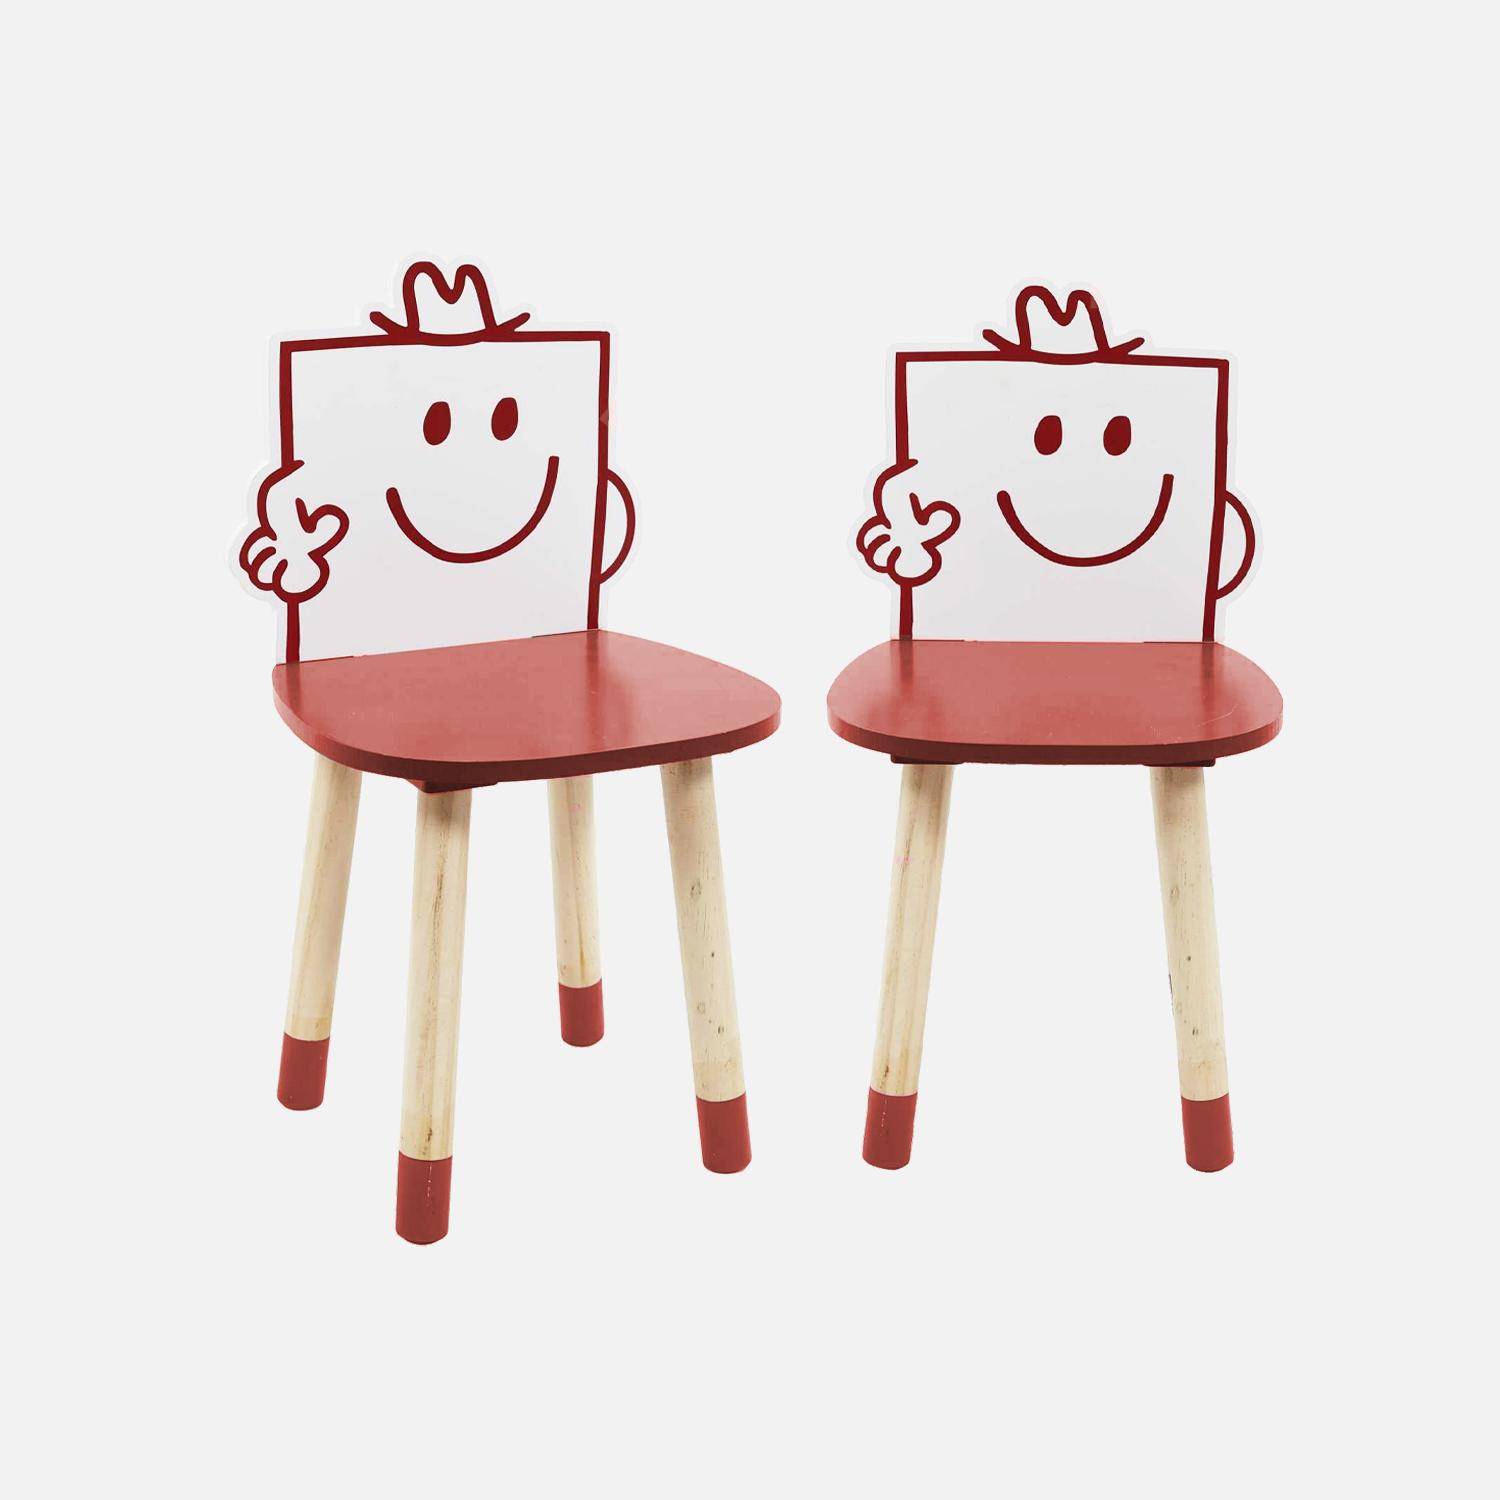 Set of 2 children's chairs, Mr. Men & Little Miss collection - Mr. Strong , Pierre, red,sweeek,Photo3